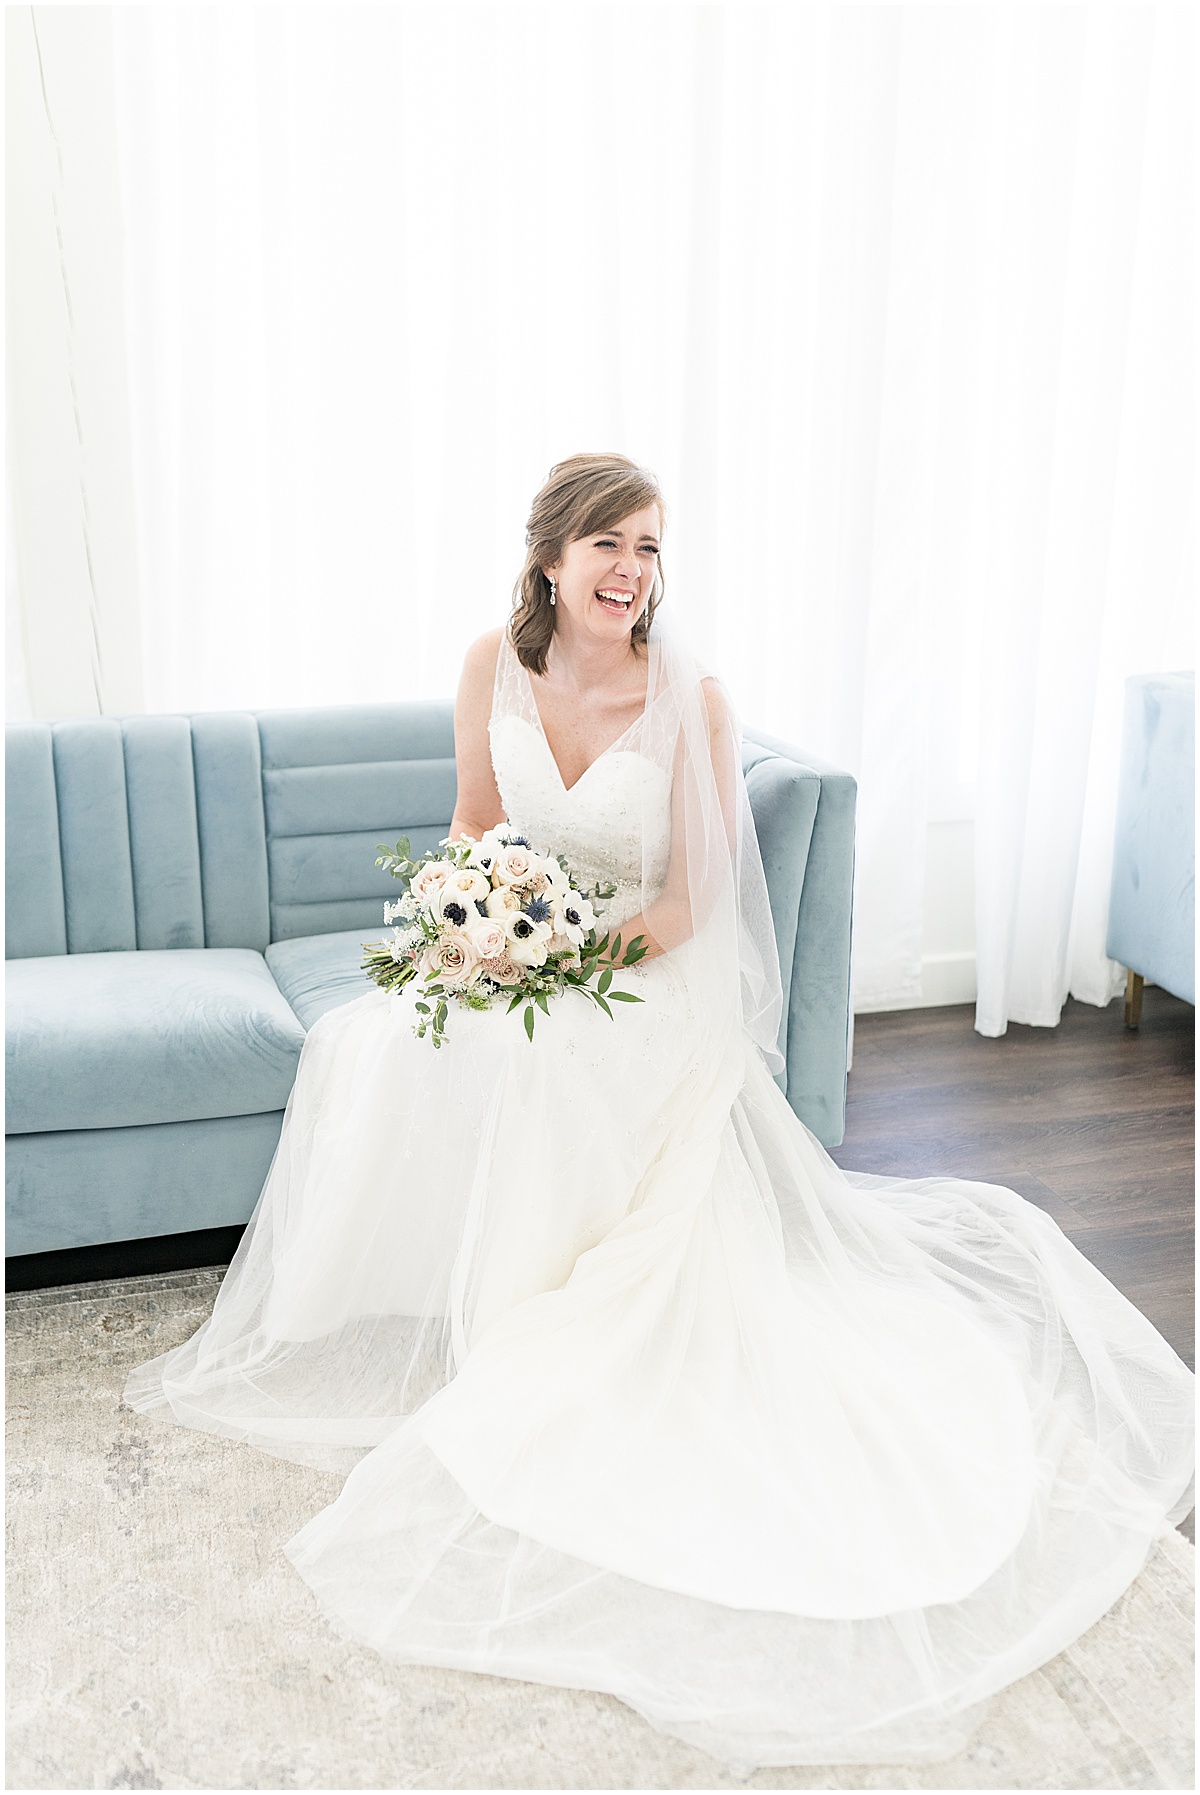 Bridal portrait before wedding at The Sixpence in Whitestown, Indiana photographed by Indianapolis wedding photographer Victoria Rayburn